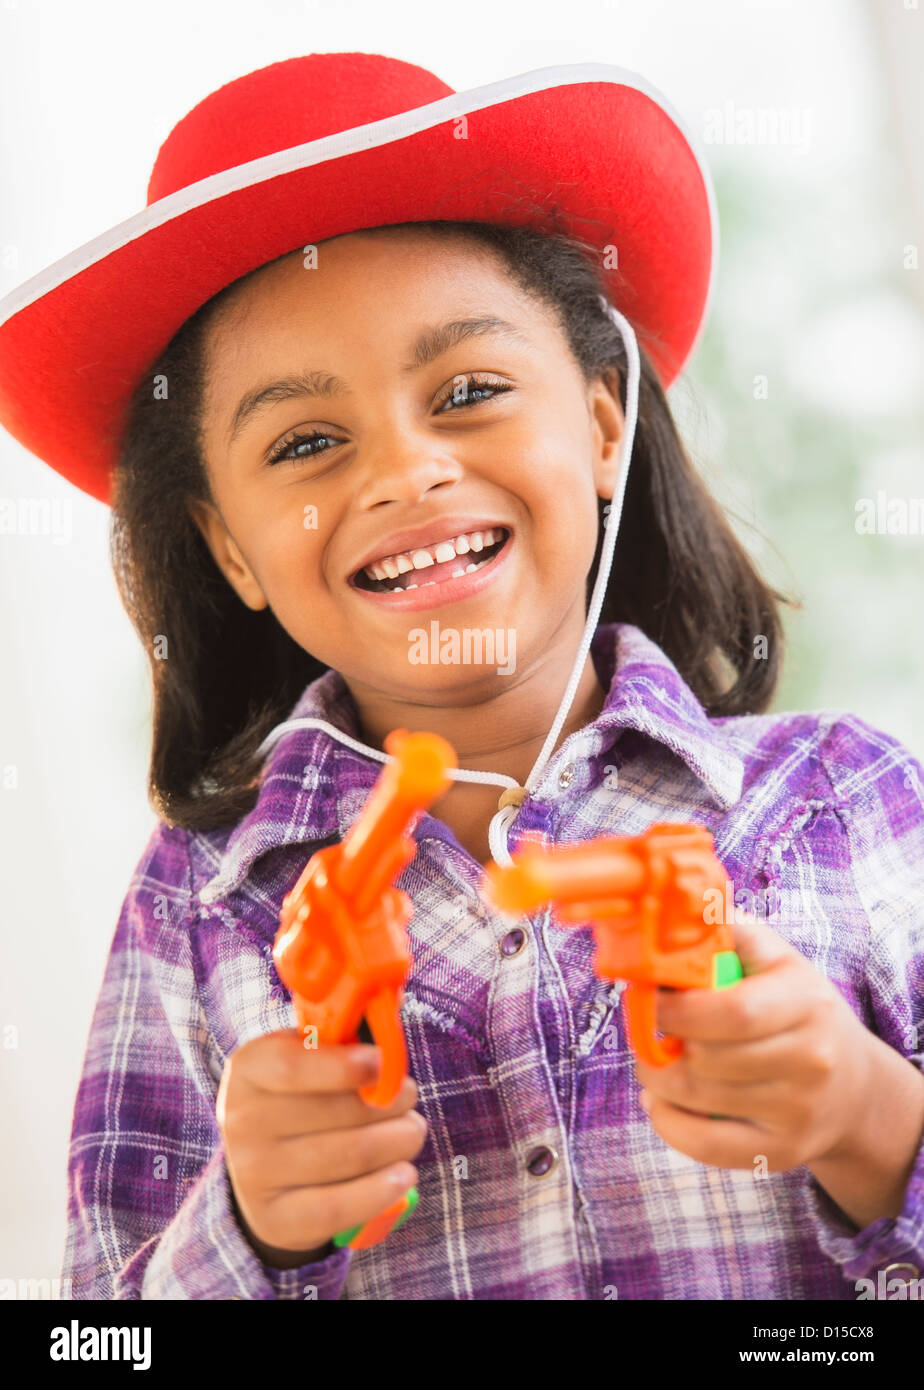 USA, New Jersey, Jersey City, Portrait of smiling girl (6-7) with cowboy hat and toy gun Stock Photo